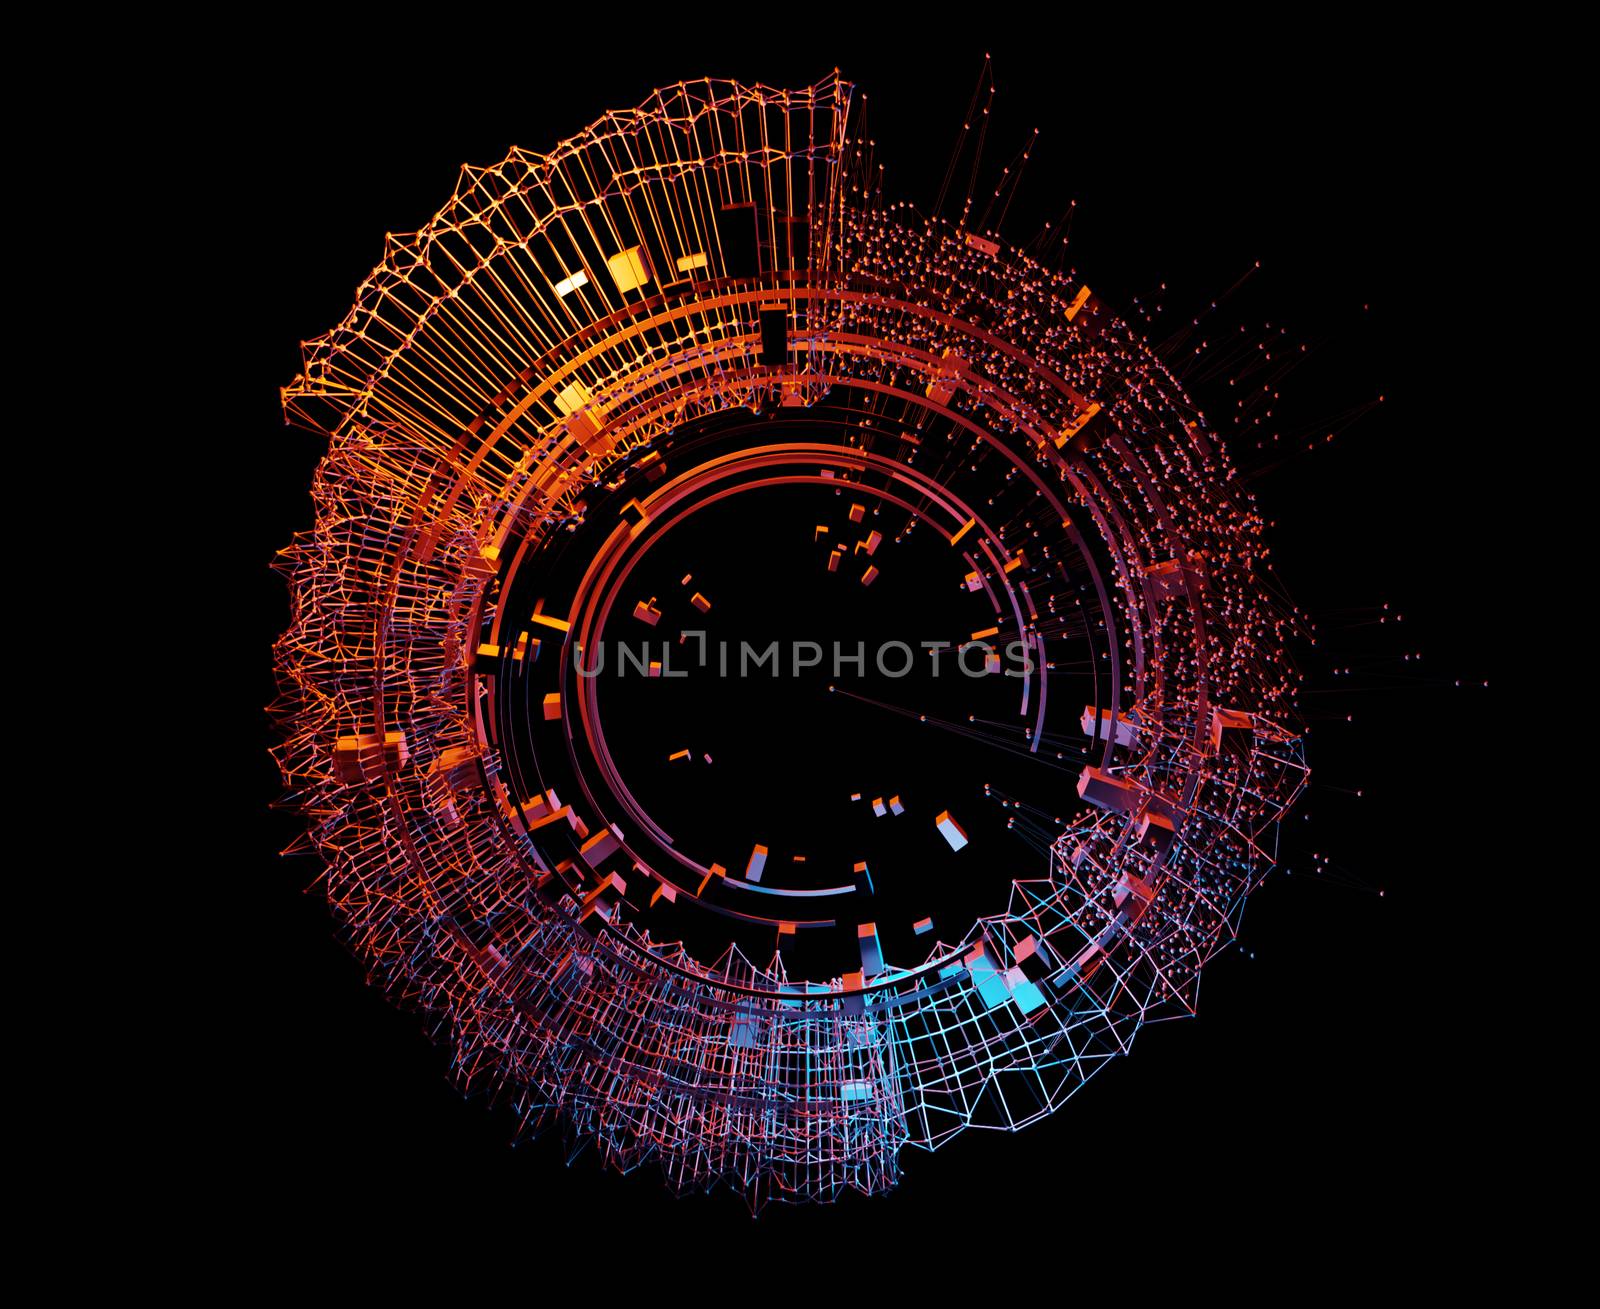 Concept Design Abstract Architecture or HUD Element or Space Station by cherezoff